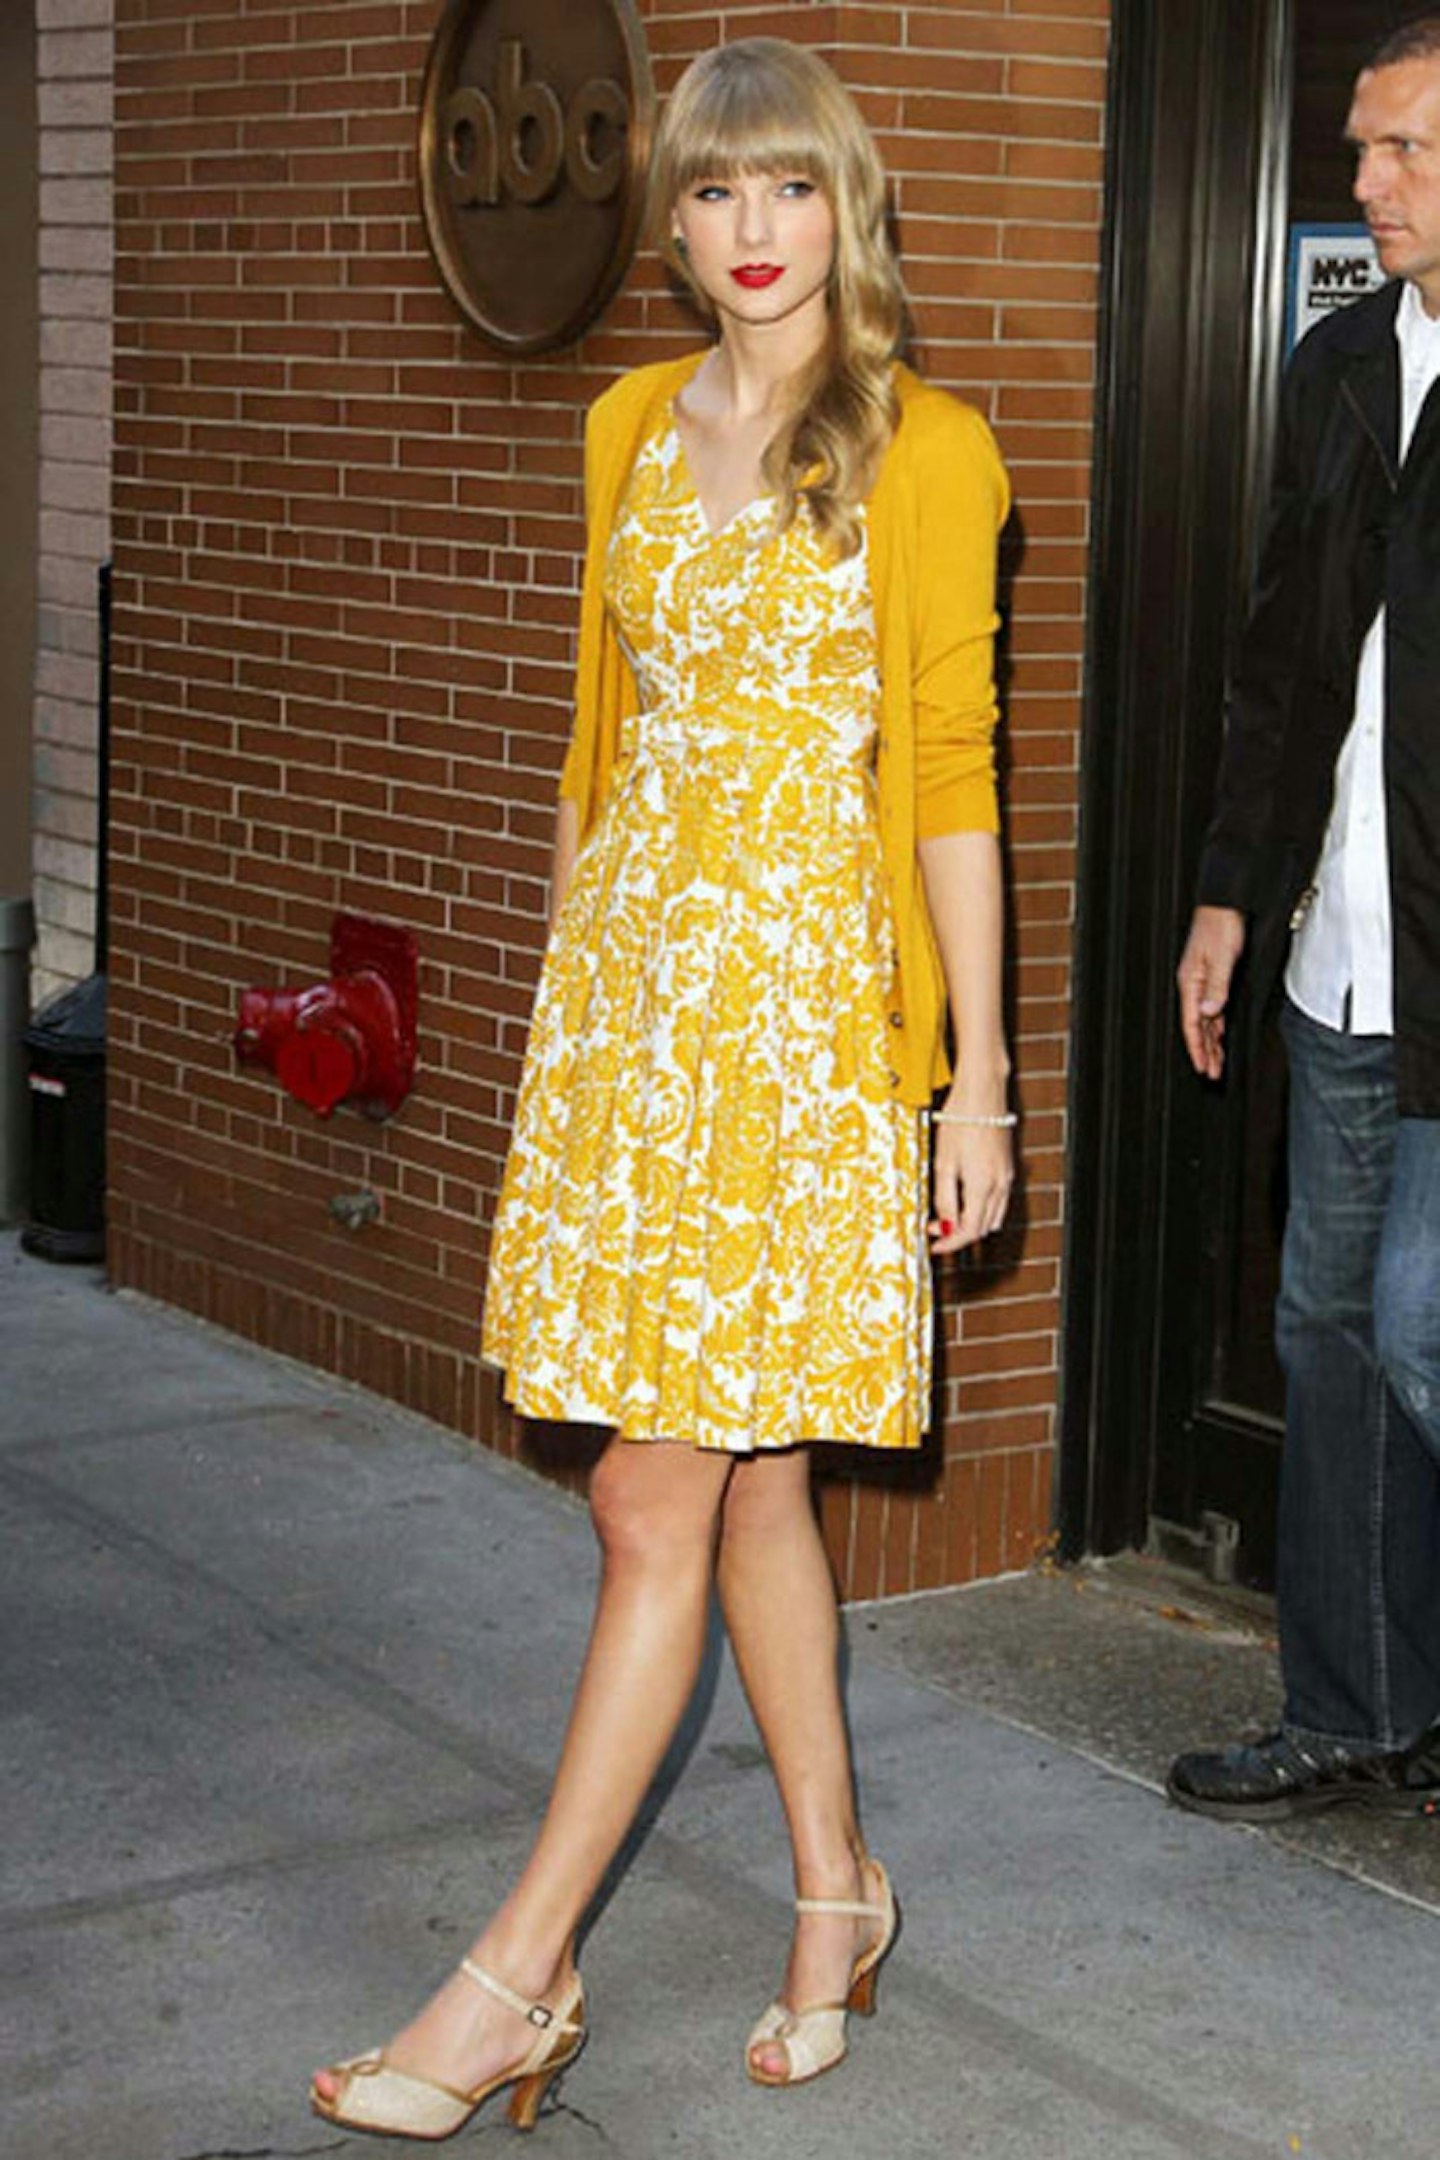 3 4- Taylor Swift at the ABC Studios in New York - 22 October 2012